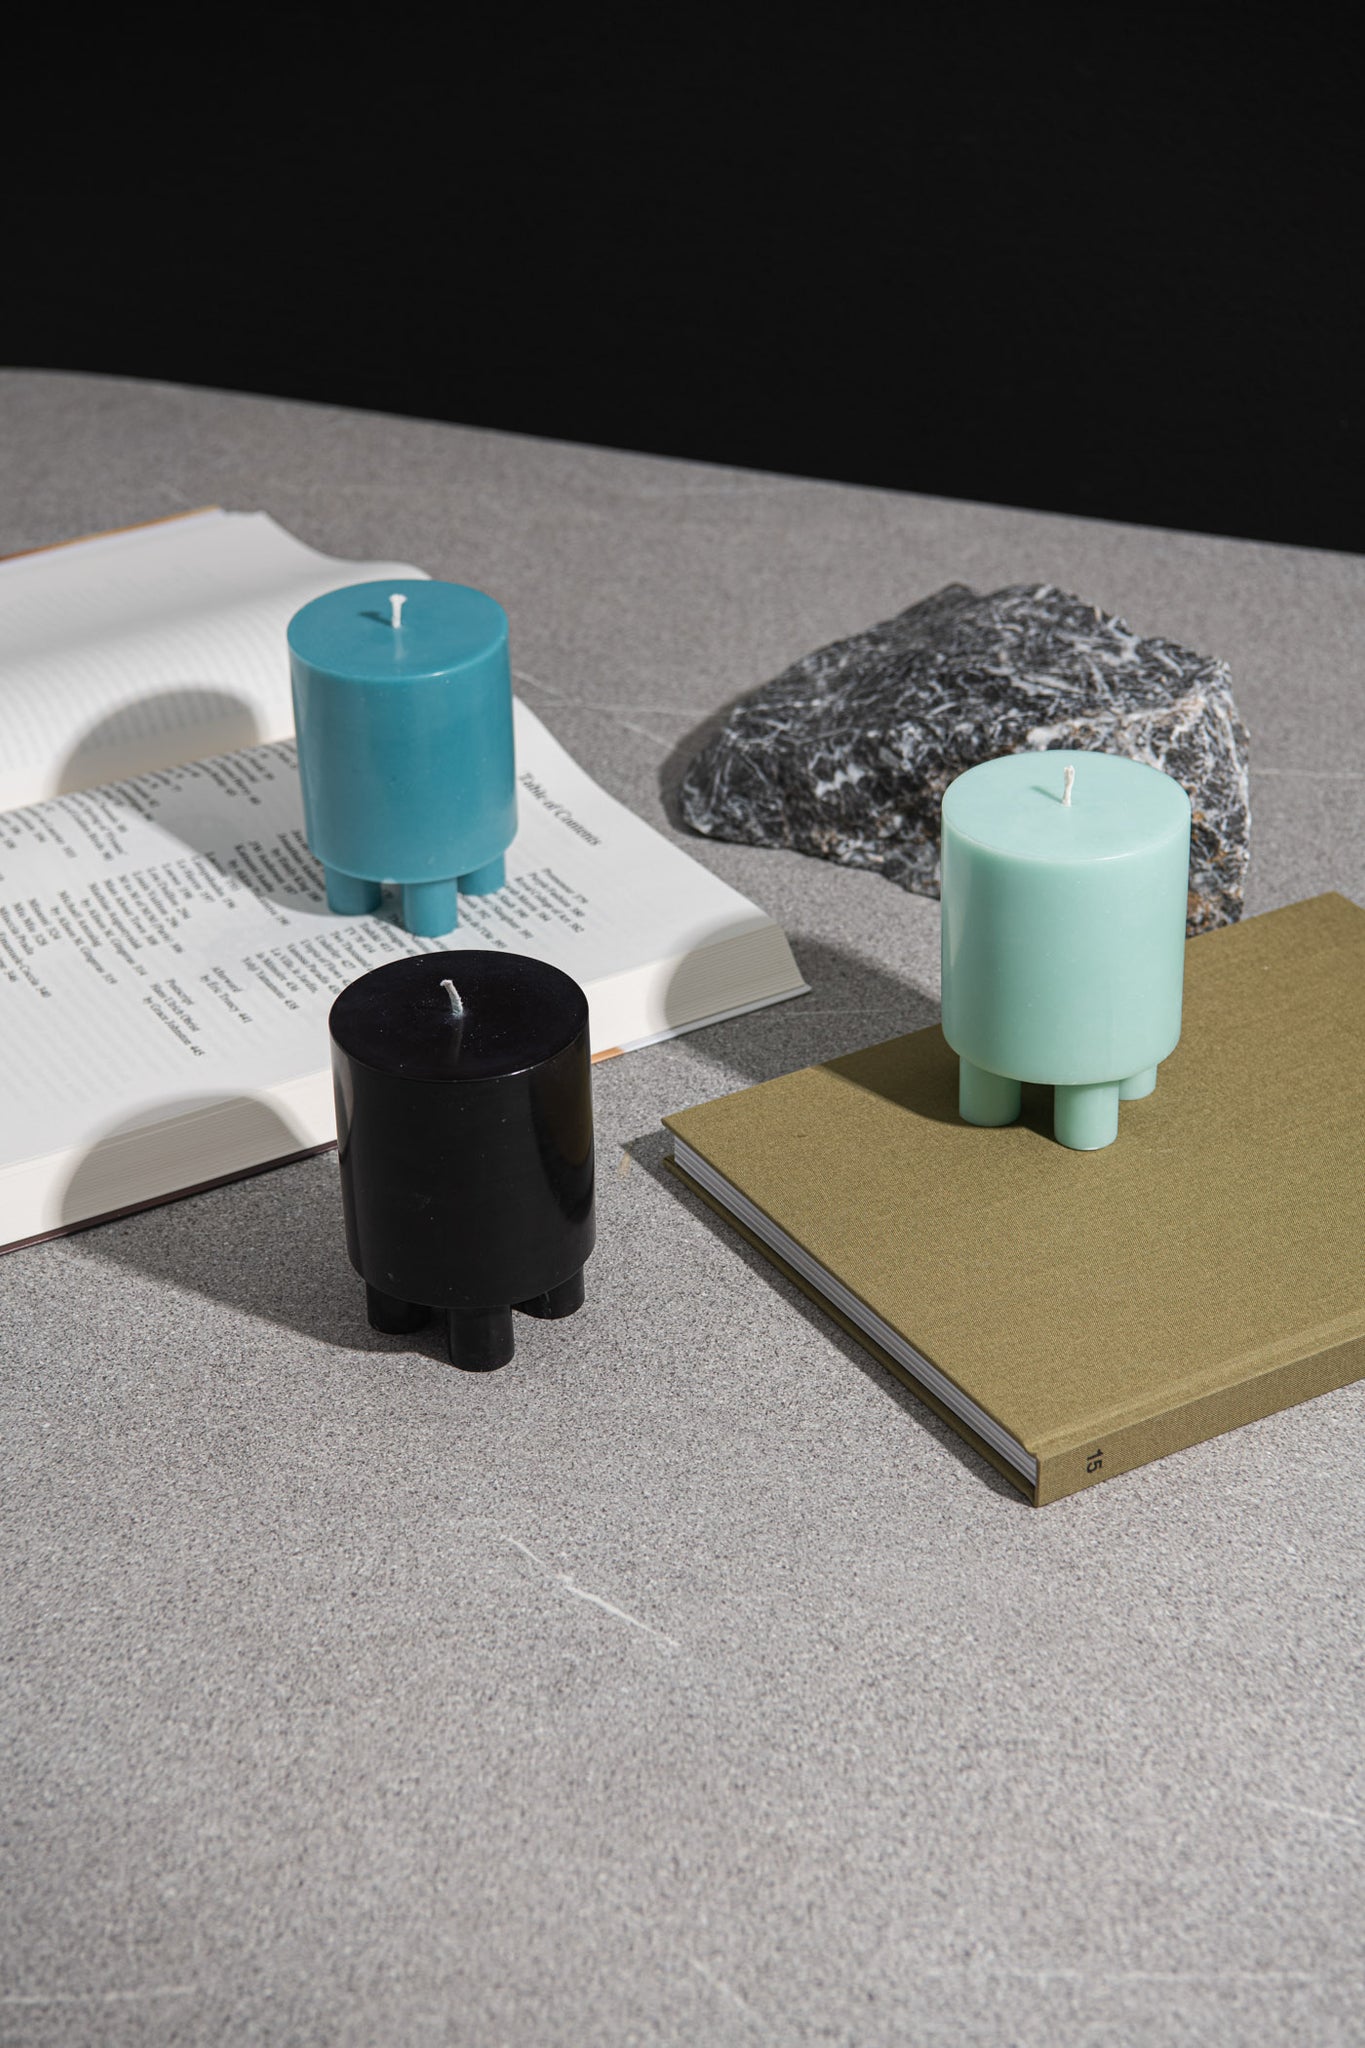 Stack Candle Prop, shaped candles by Yod and co in turquoise